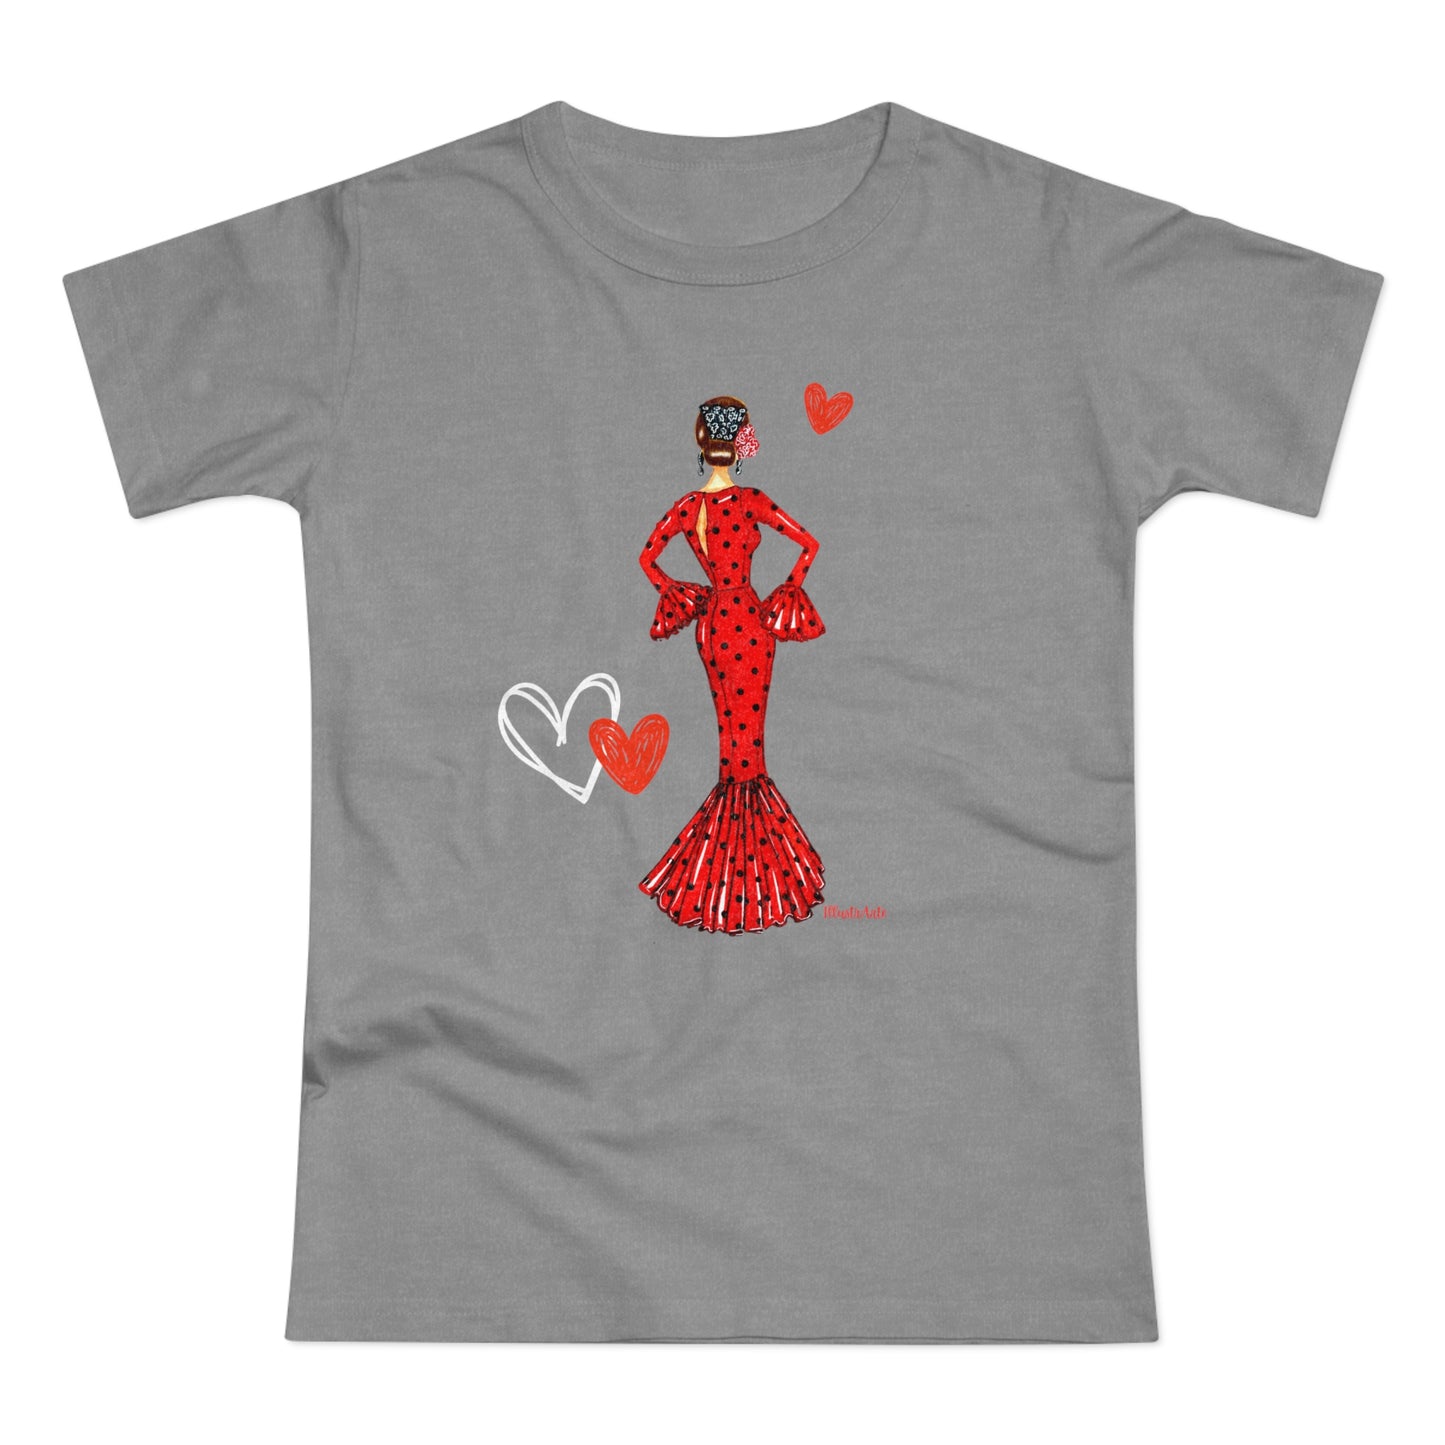 a women's t - shirt with a red dress and hearts